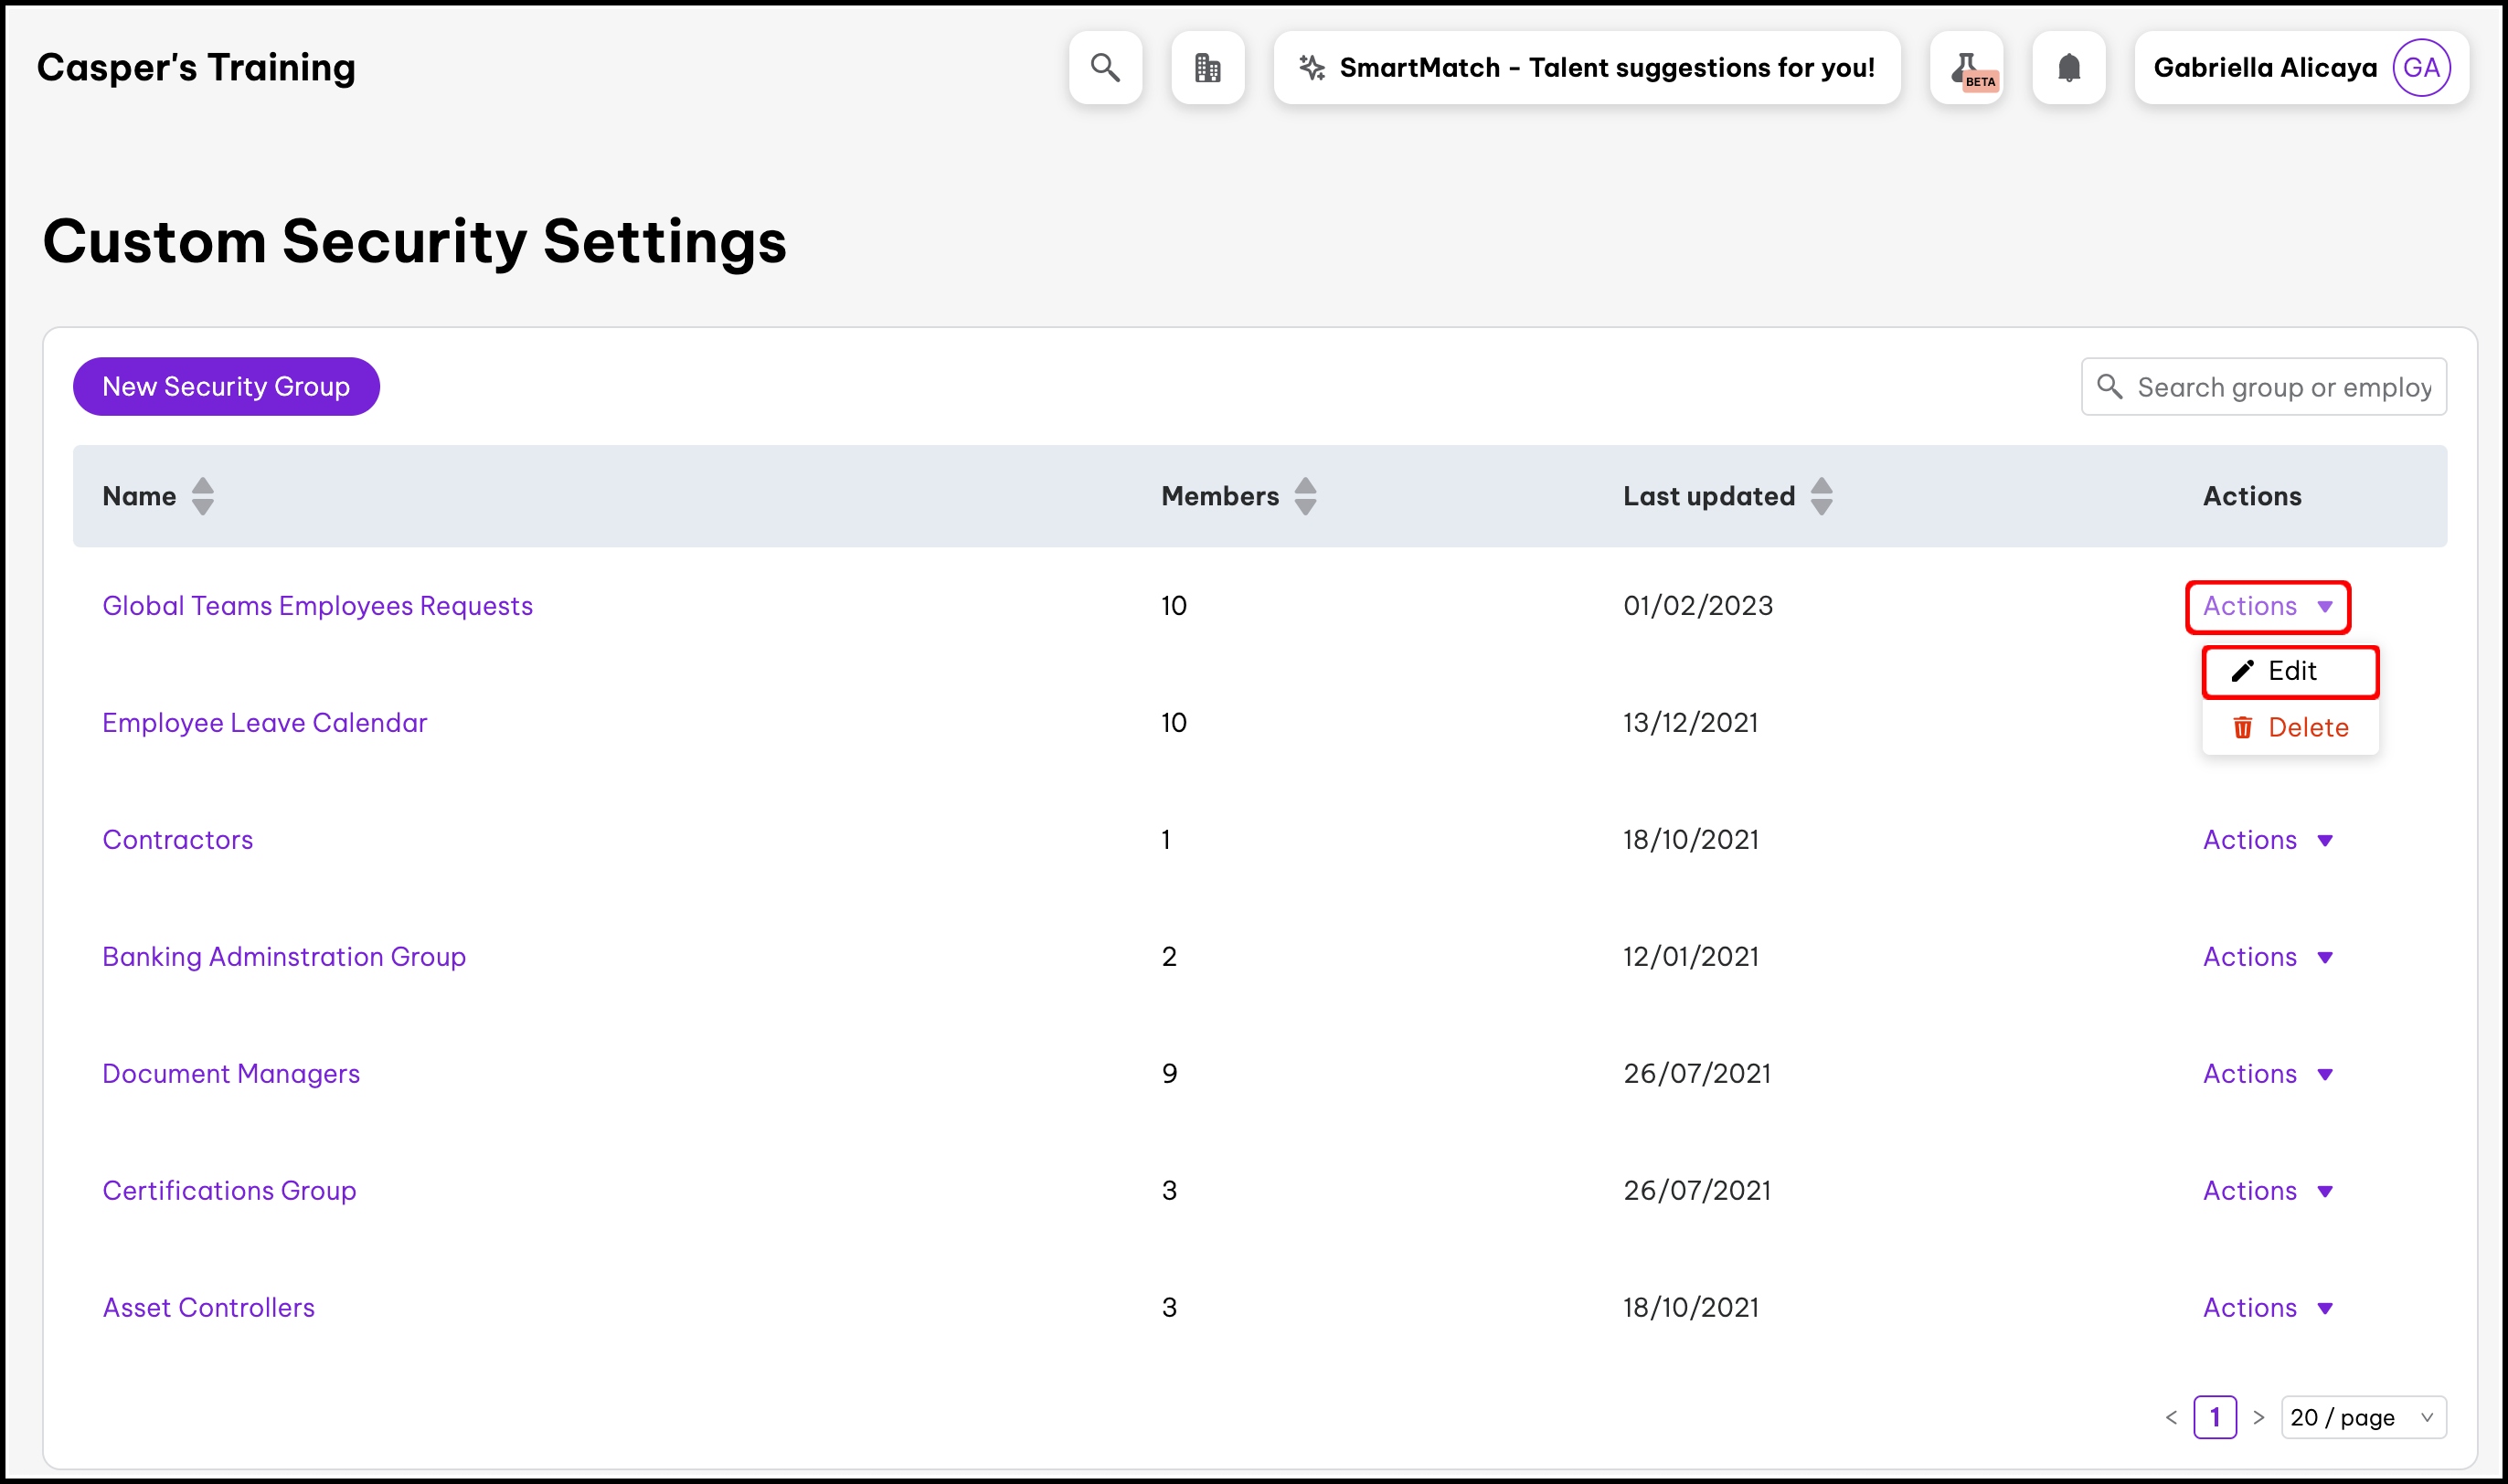 screenshot of the custom security settings, highlighting the actions and edit buttons for one group